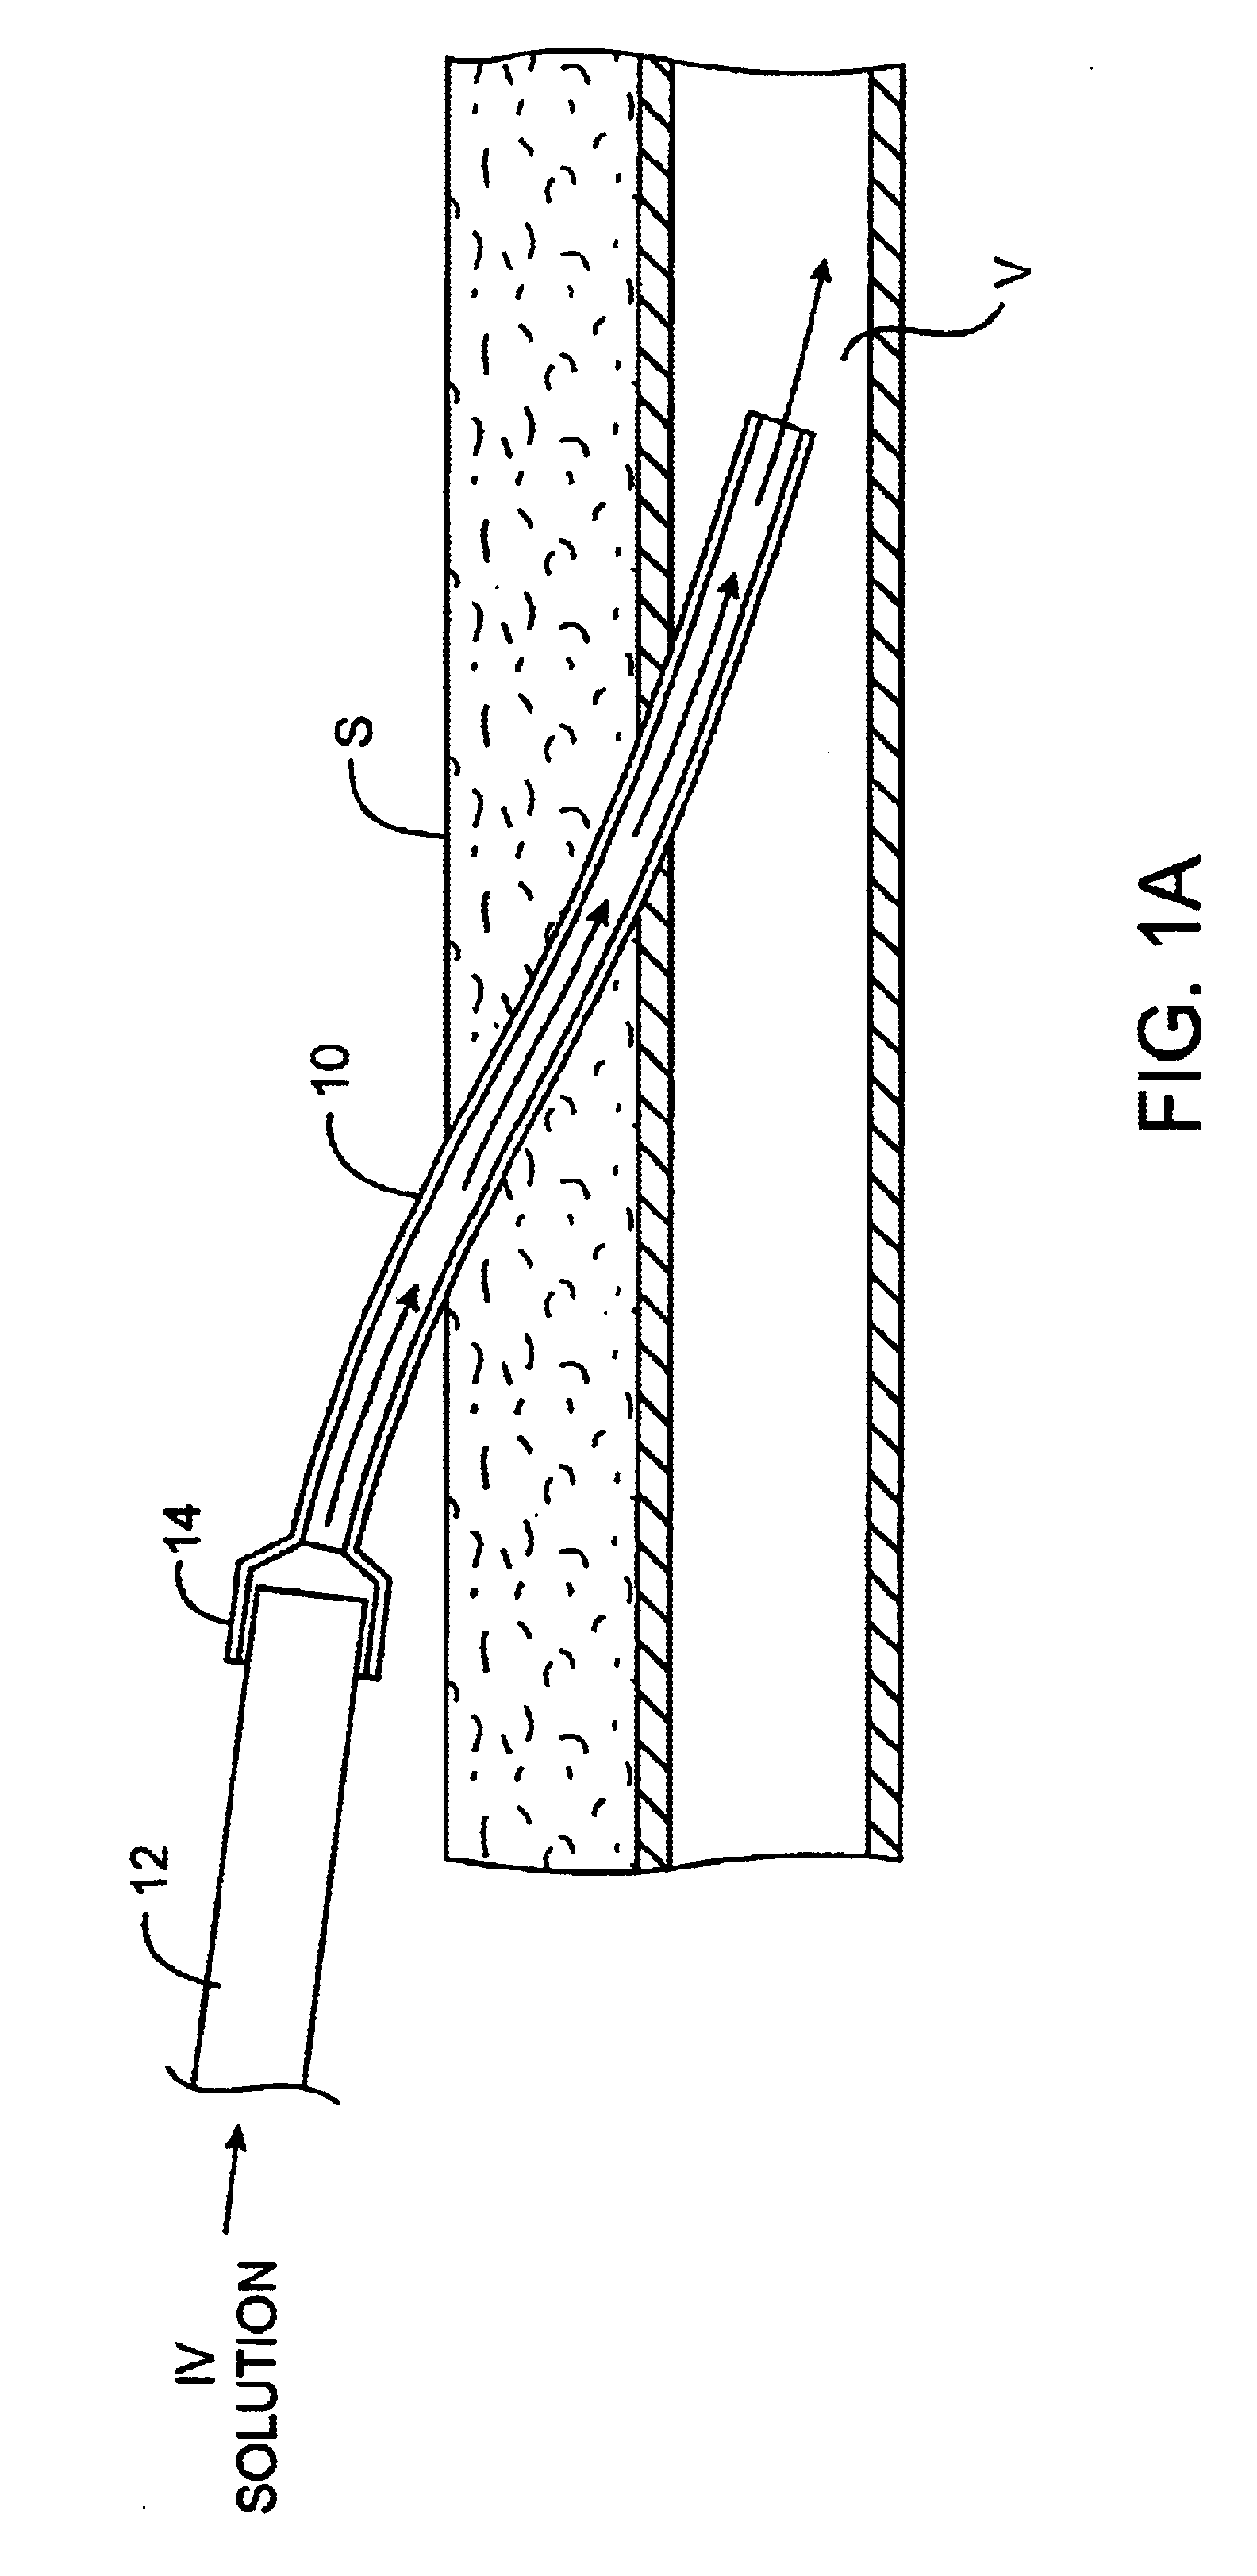 Methods and kits for locking and disinfecting implanted catheters